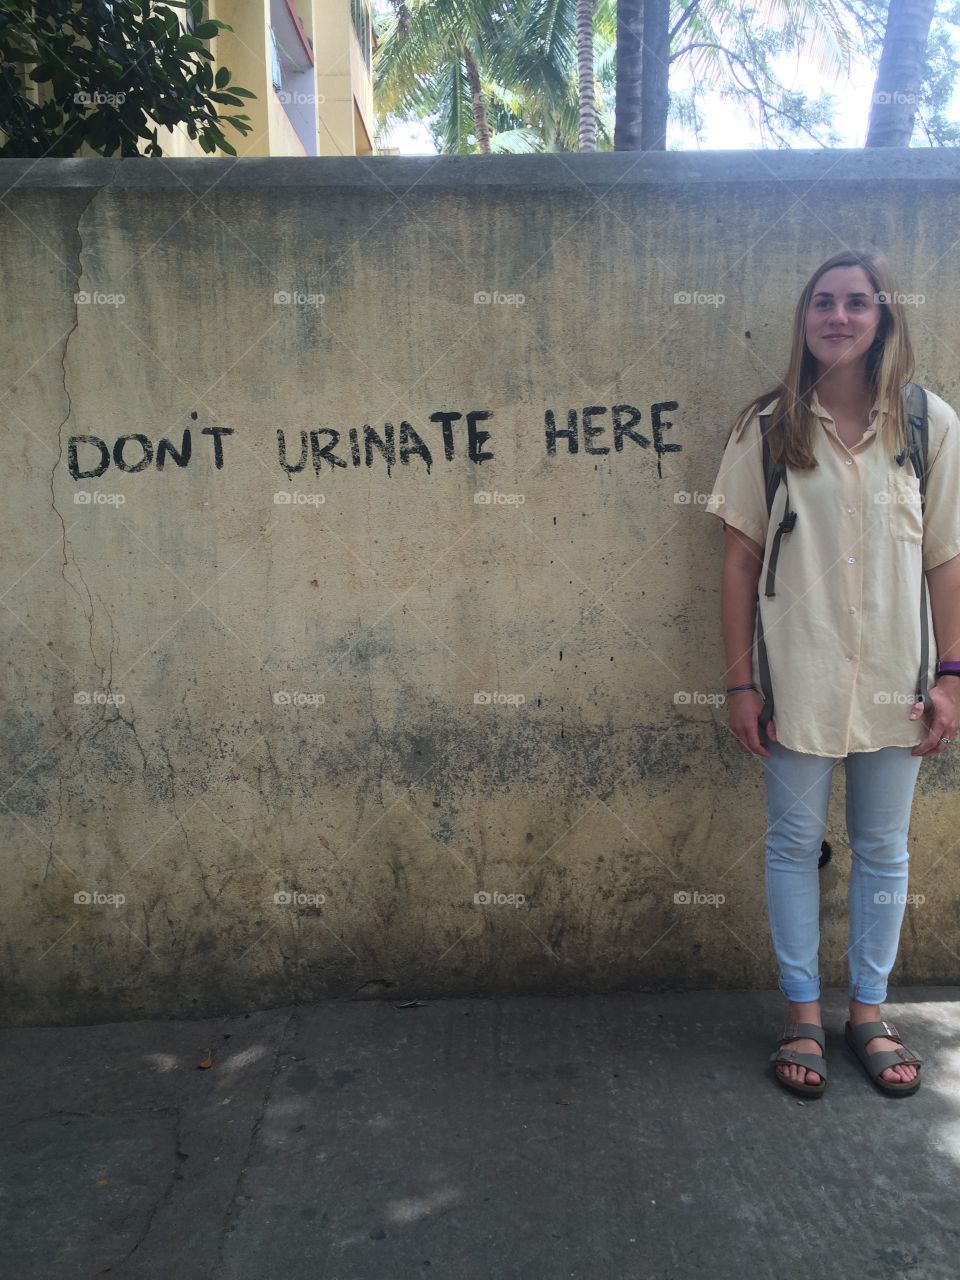 "Don't urinate here" hand painted on a wall in southern India. A young traveler standing mischievously beside it. 